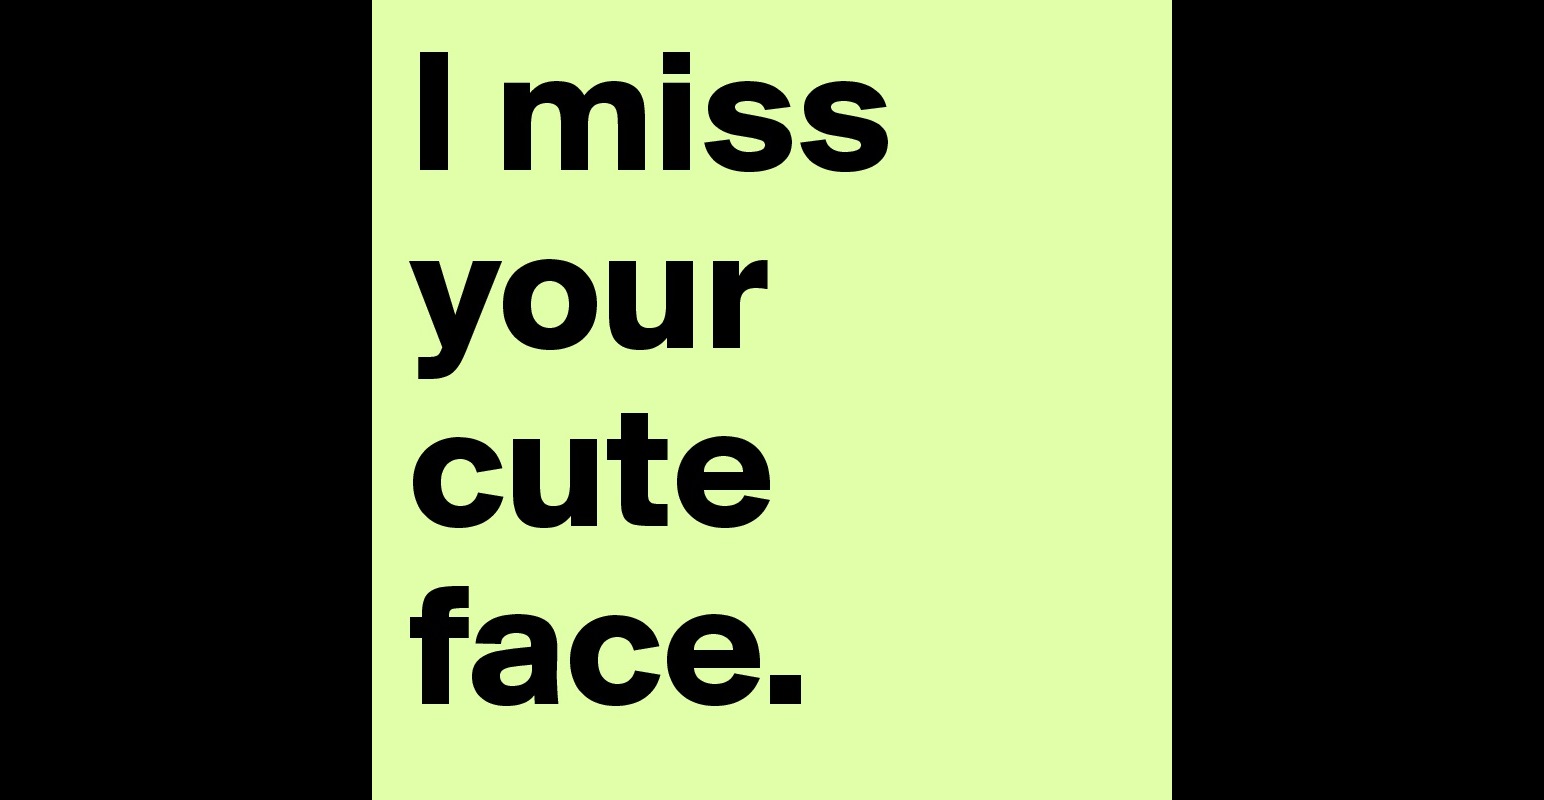 I Miss Your Cute Face Post By Itselabela98 On Boldomatic 0373